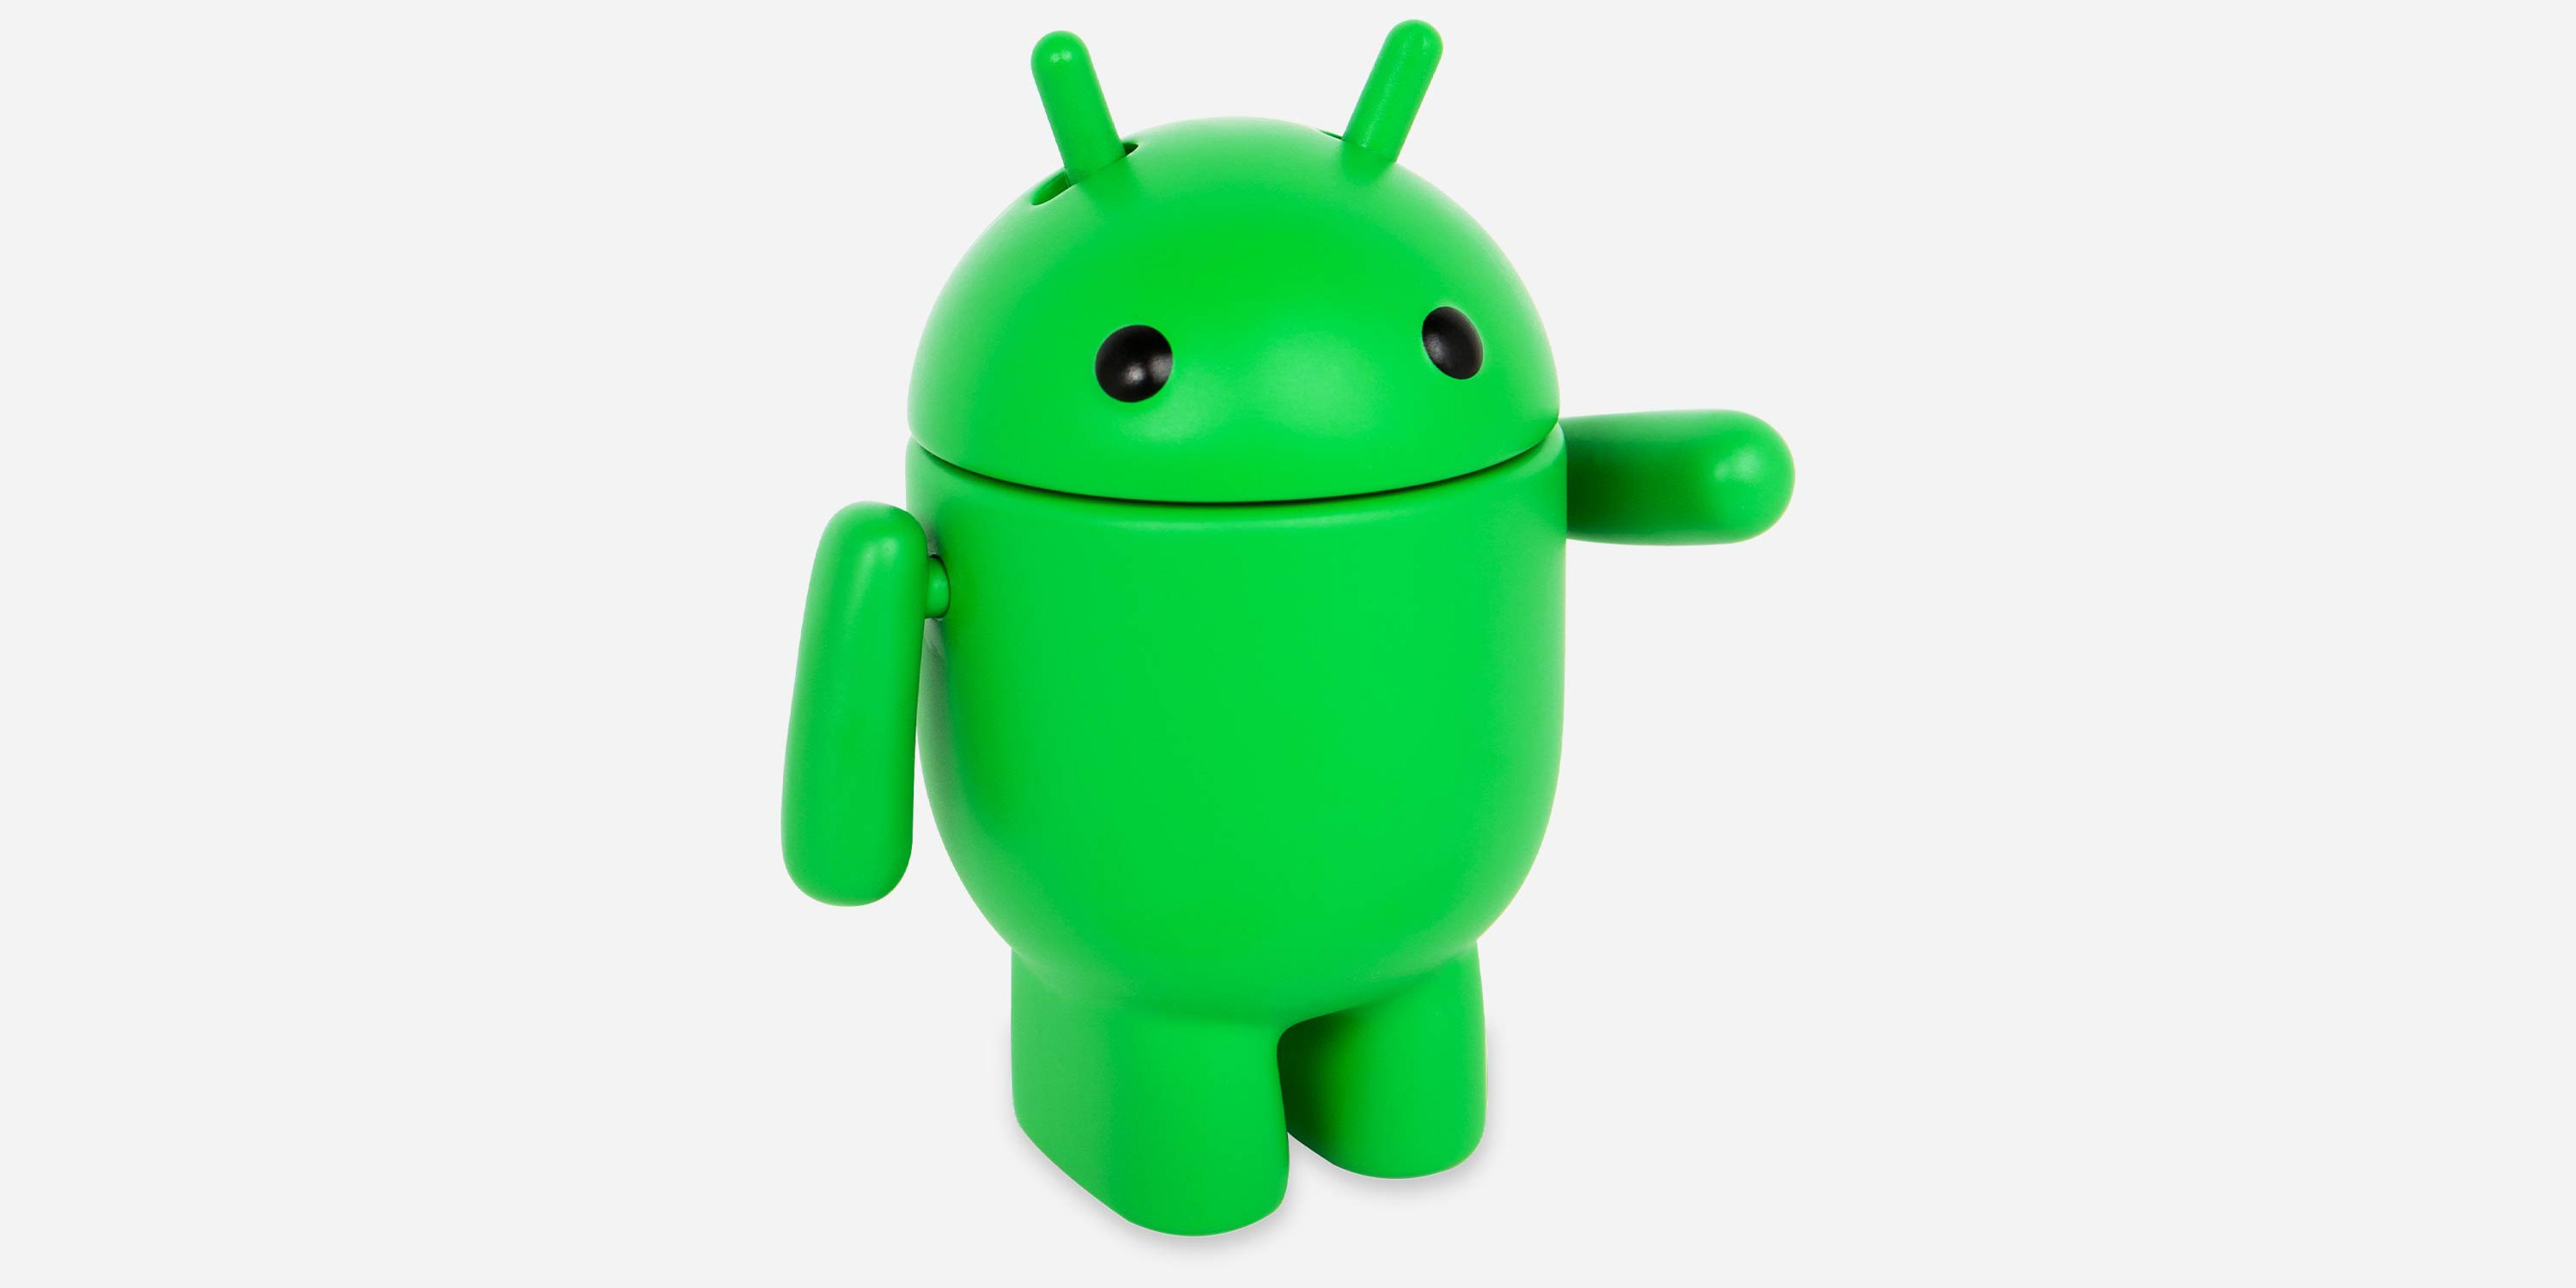 Google debuts adorable 3-inch Android 'The Bot' figure